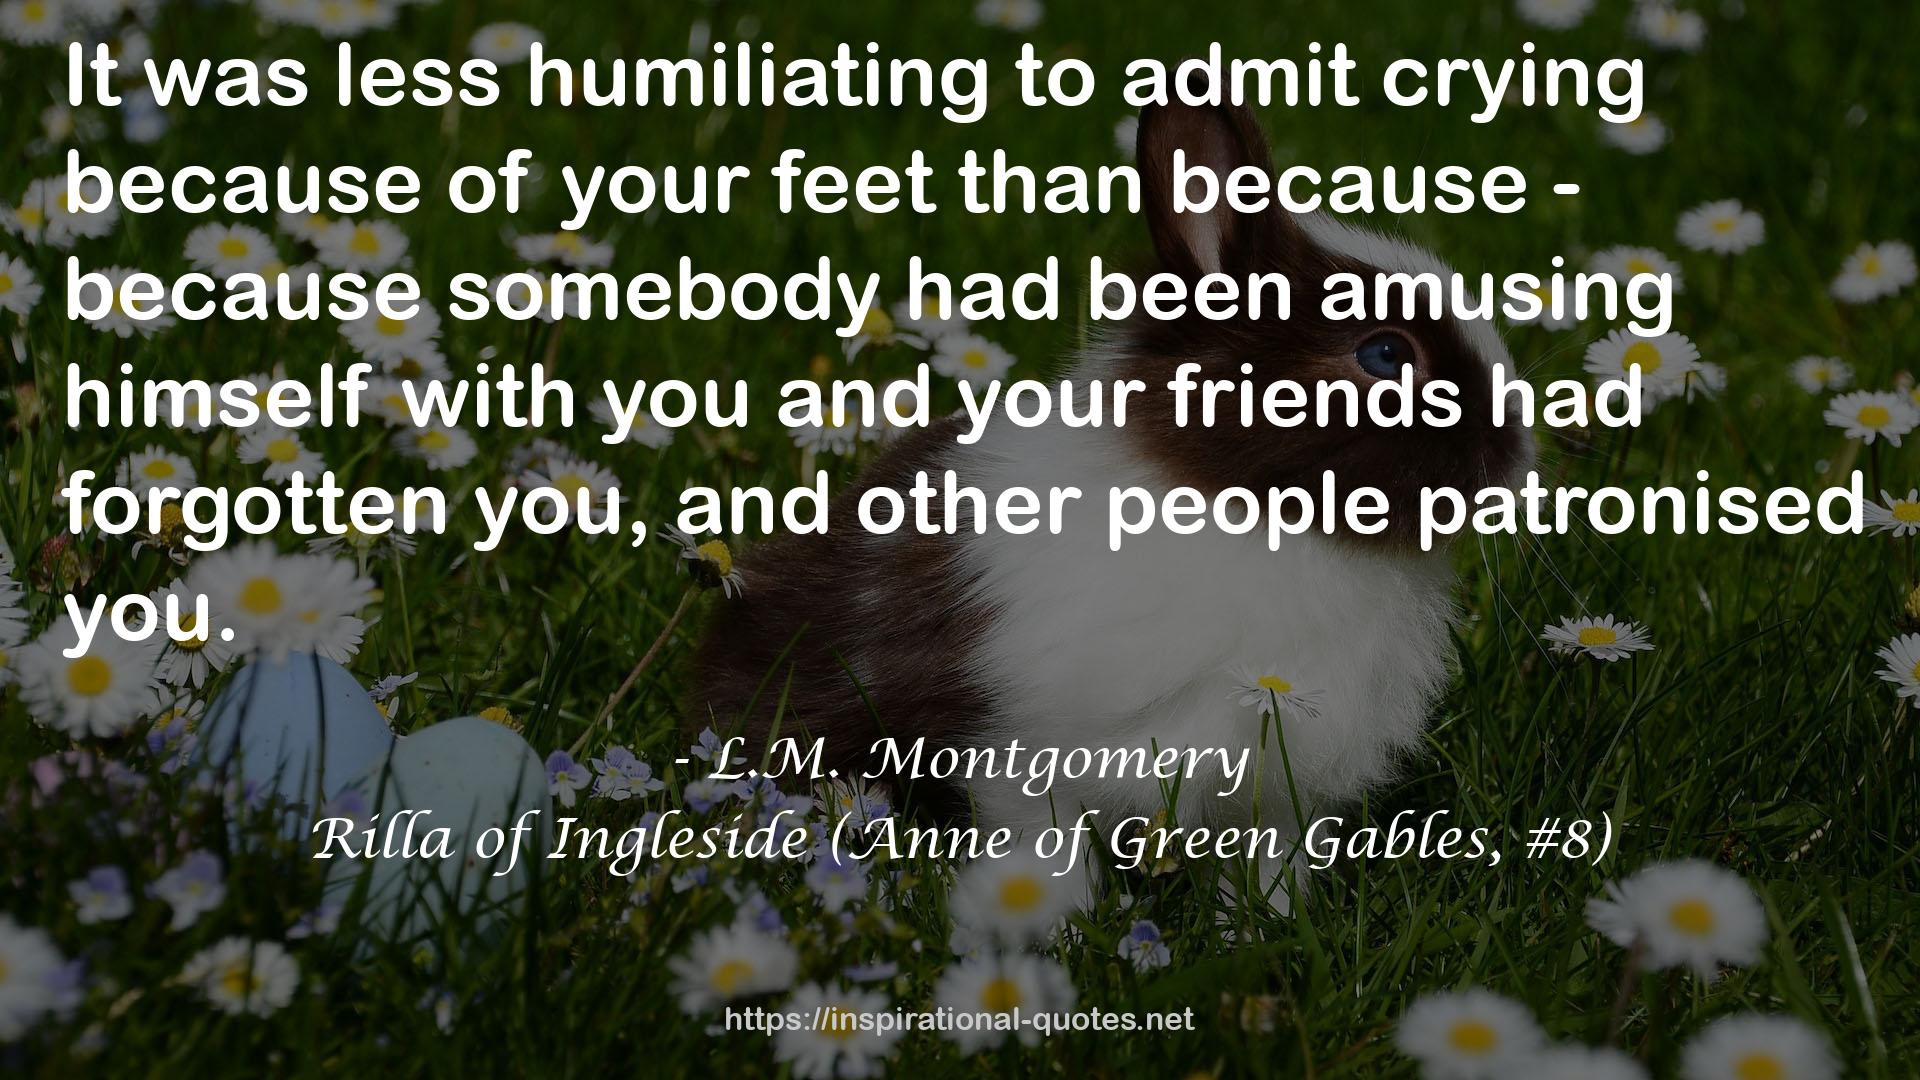 Rilla of Ingleside (Anne of Green Gables, #8) QUOTES